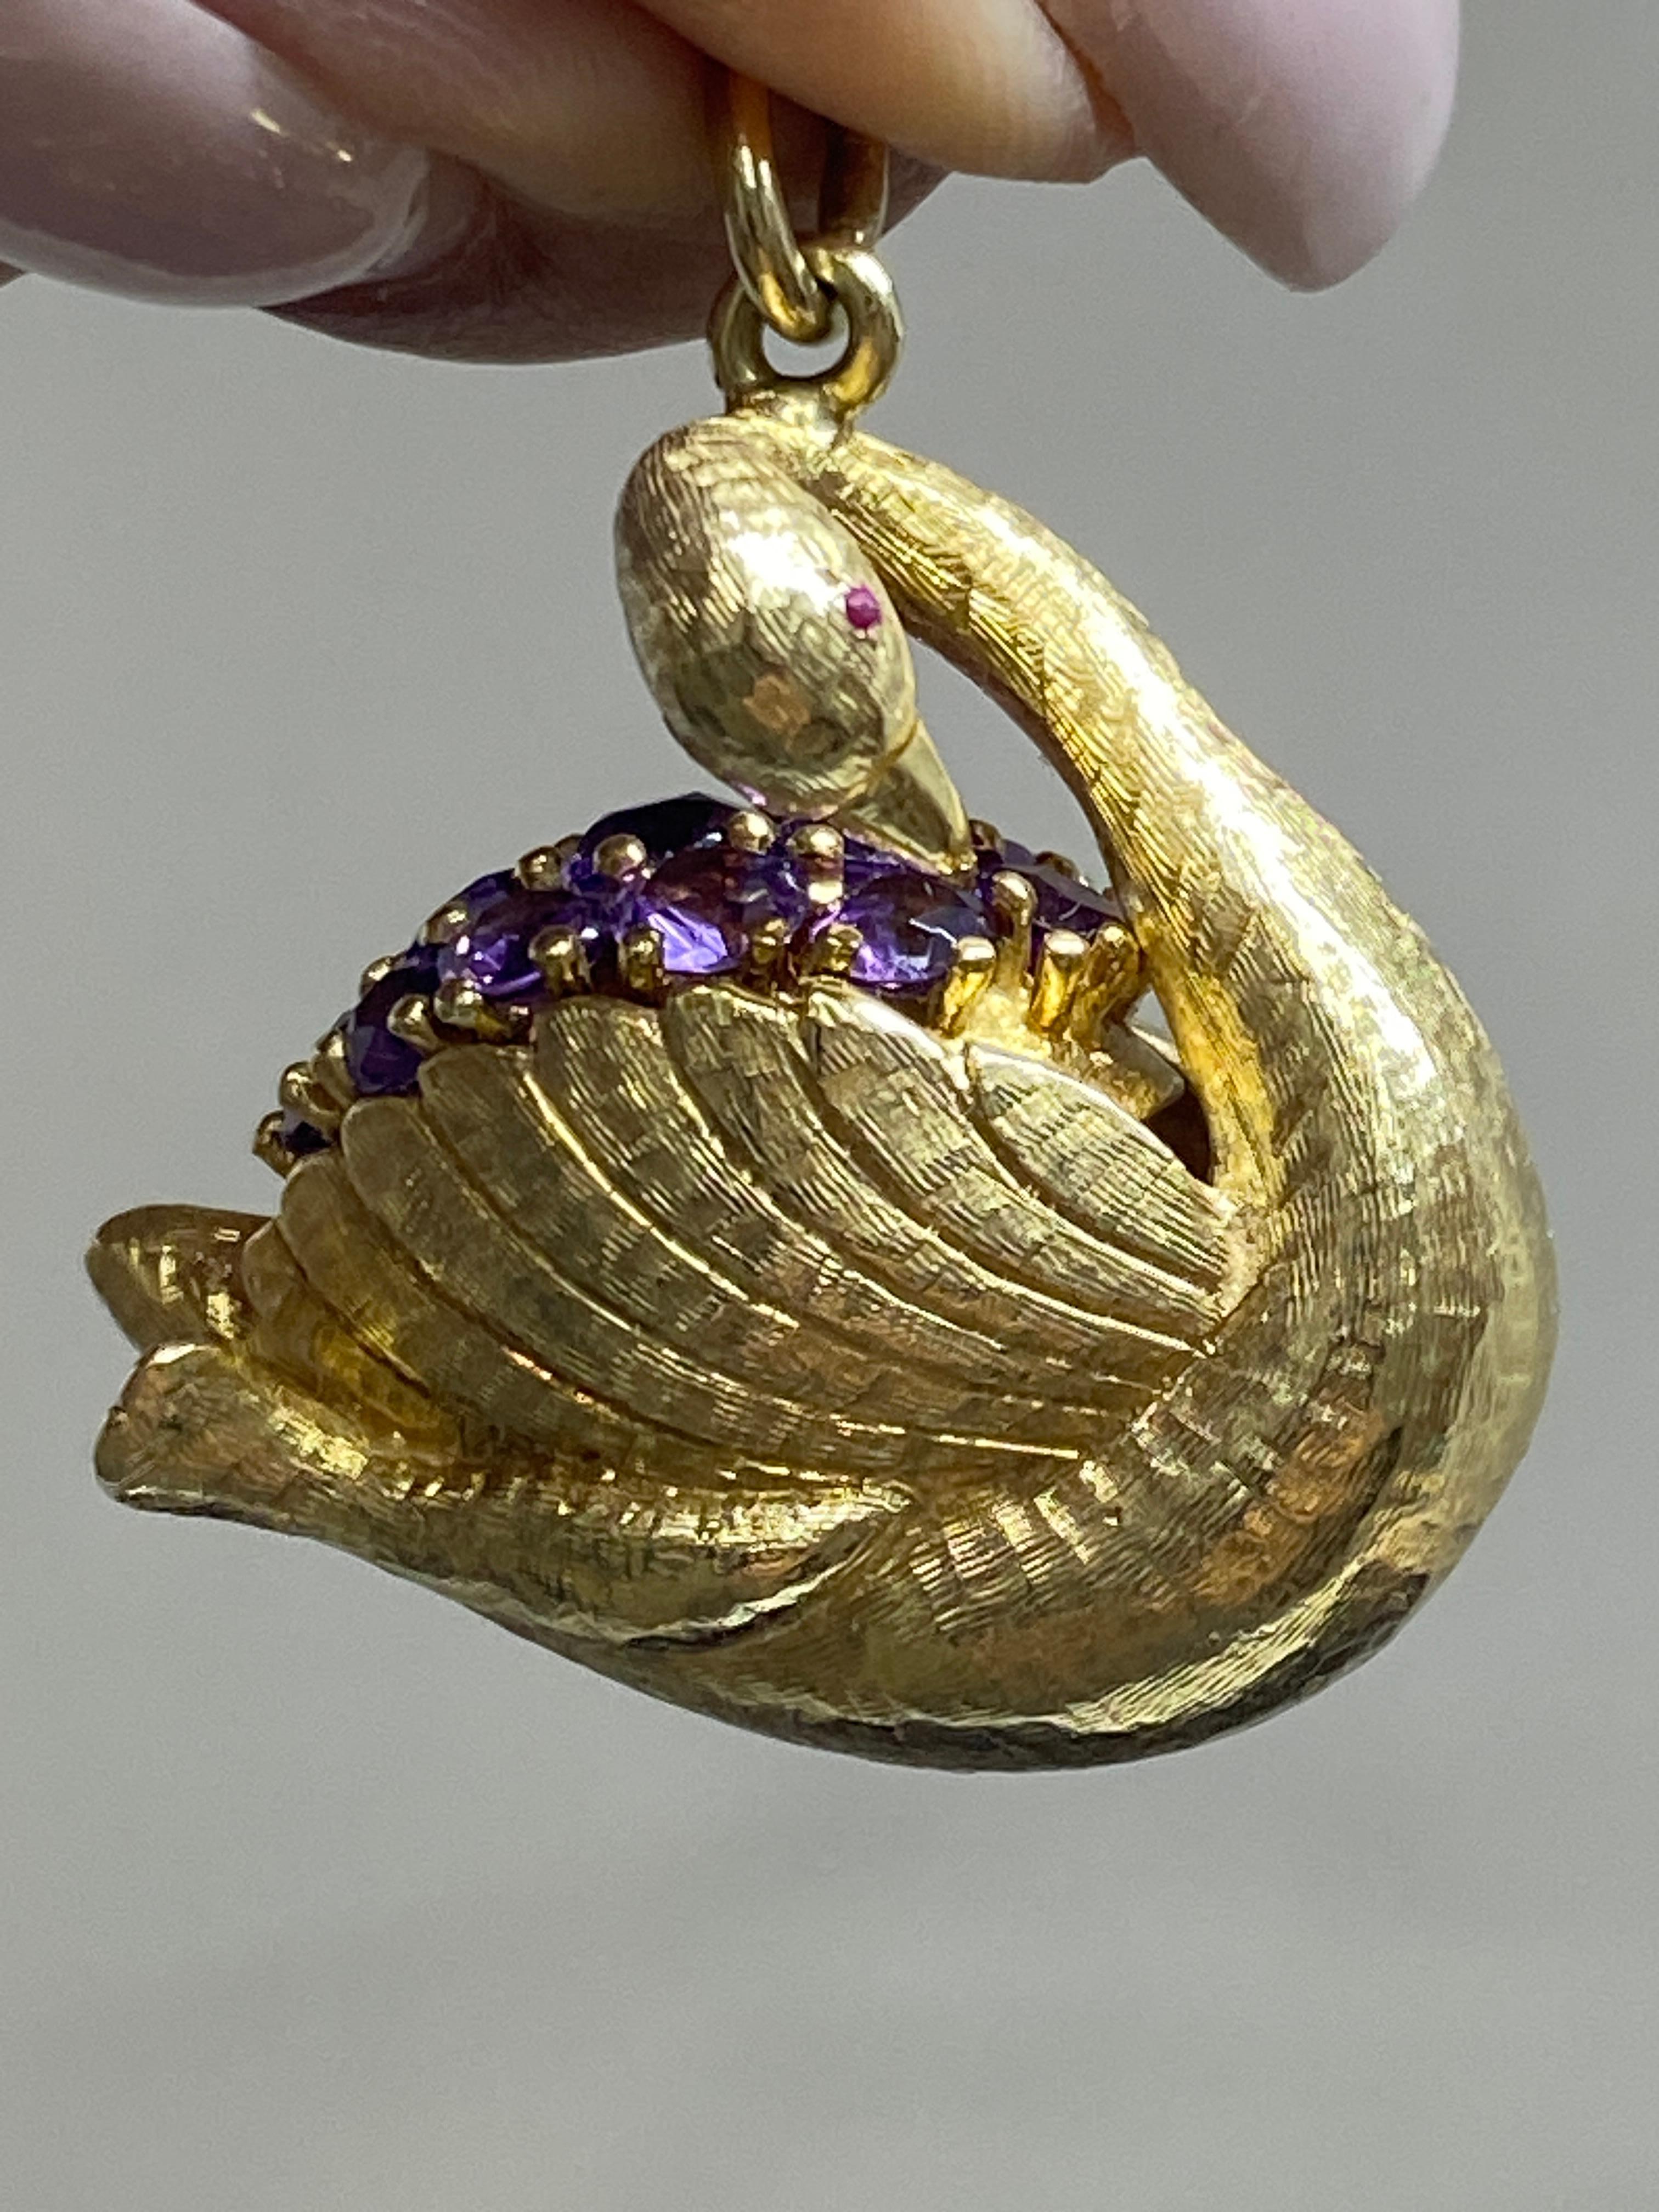 Calling all vintage charm collectors.... this beauty is for you!

Here we a very finely made three dimensional swan charm crafted in heavy 14k yellow gold in a stunning textural florentine finish. 
This is a very elegant swan featuring a long turned